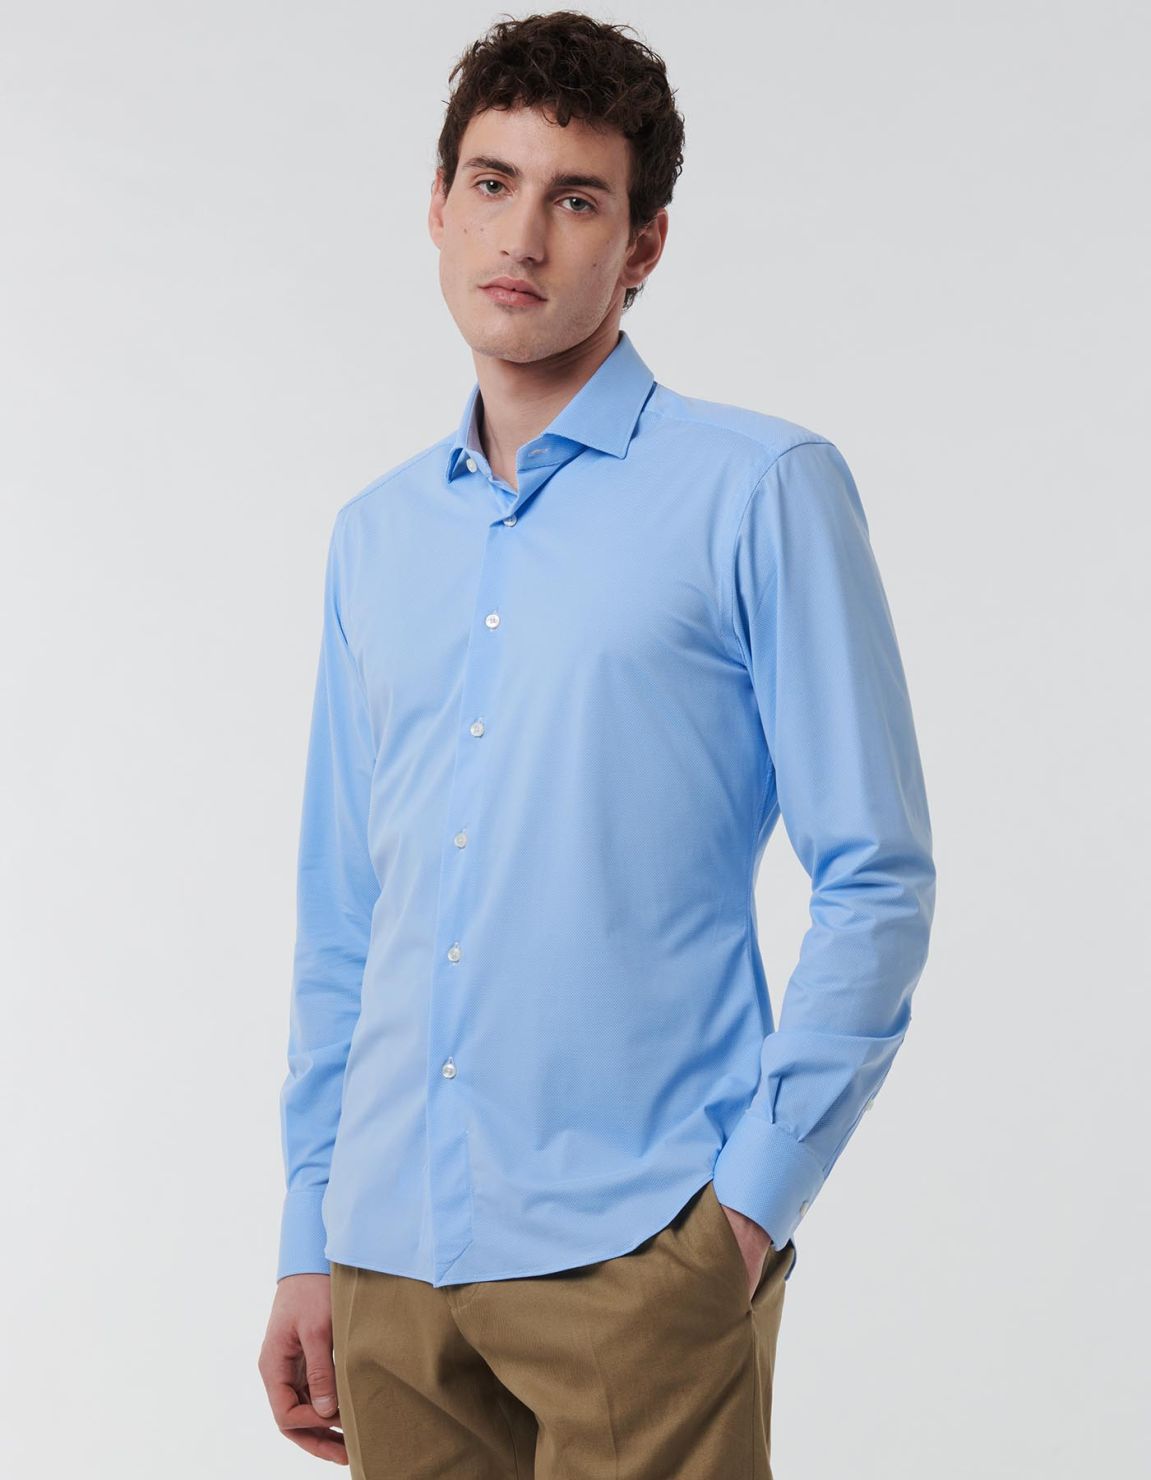 Light Blue Textured Solid colour Shirt Collar small cutaway Slim Fit 7